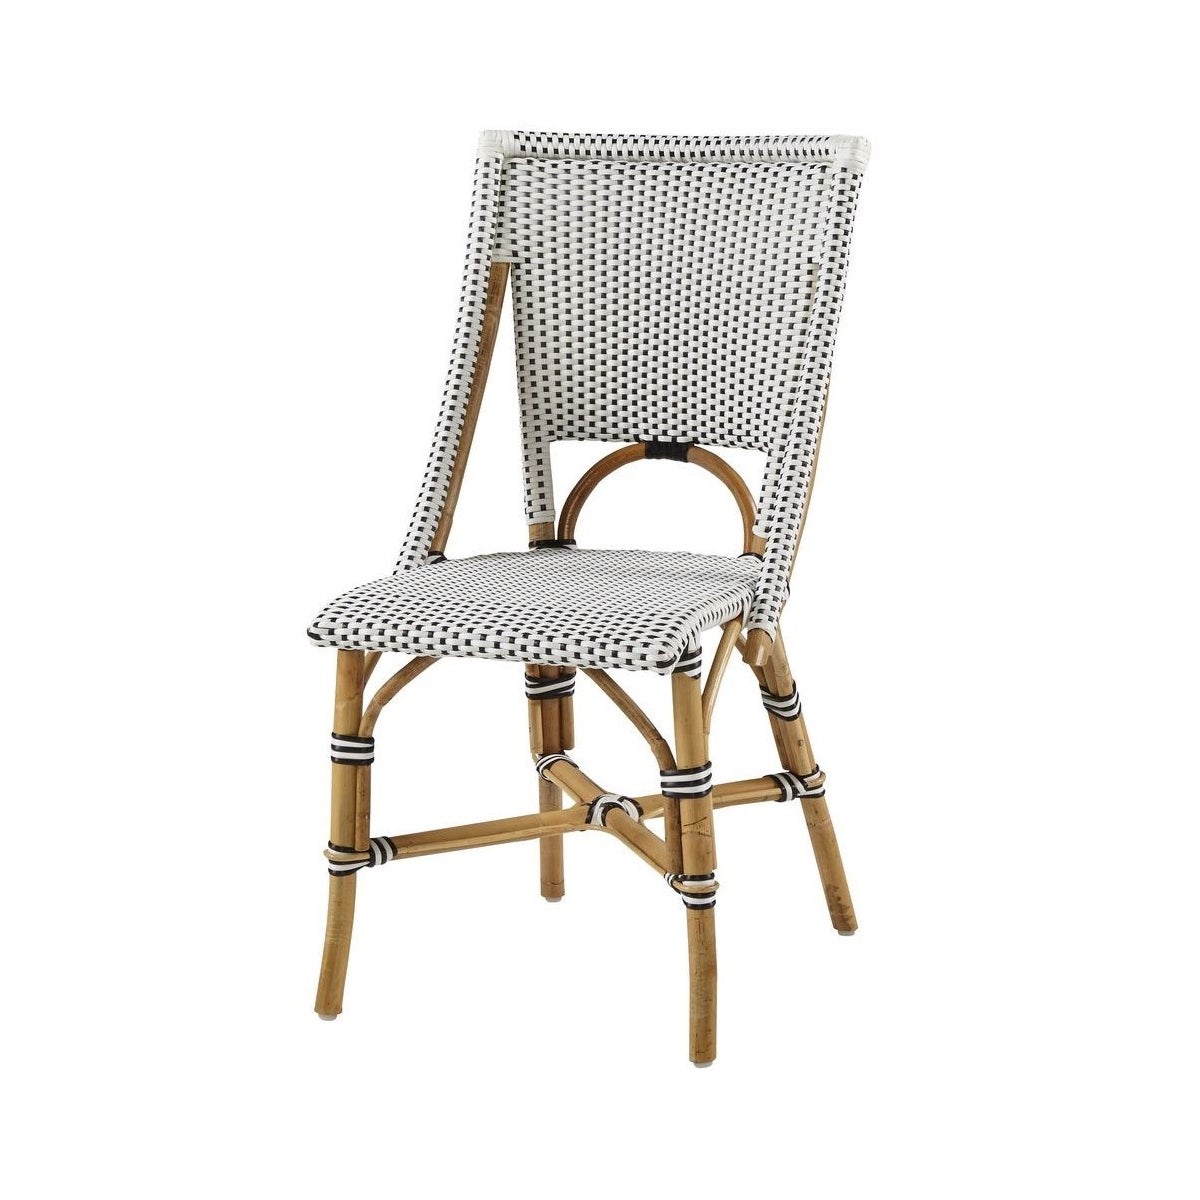 Bistro Chair Color - White & Black  SOLD IN PAIRS ONLY